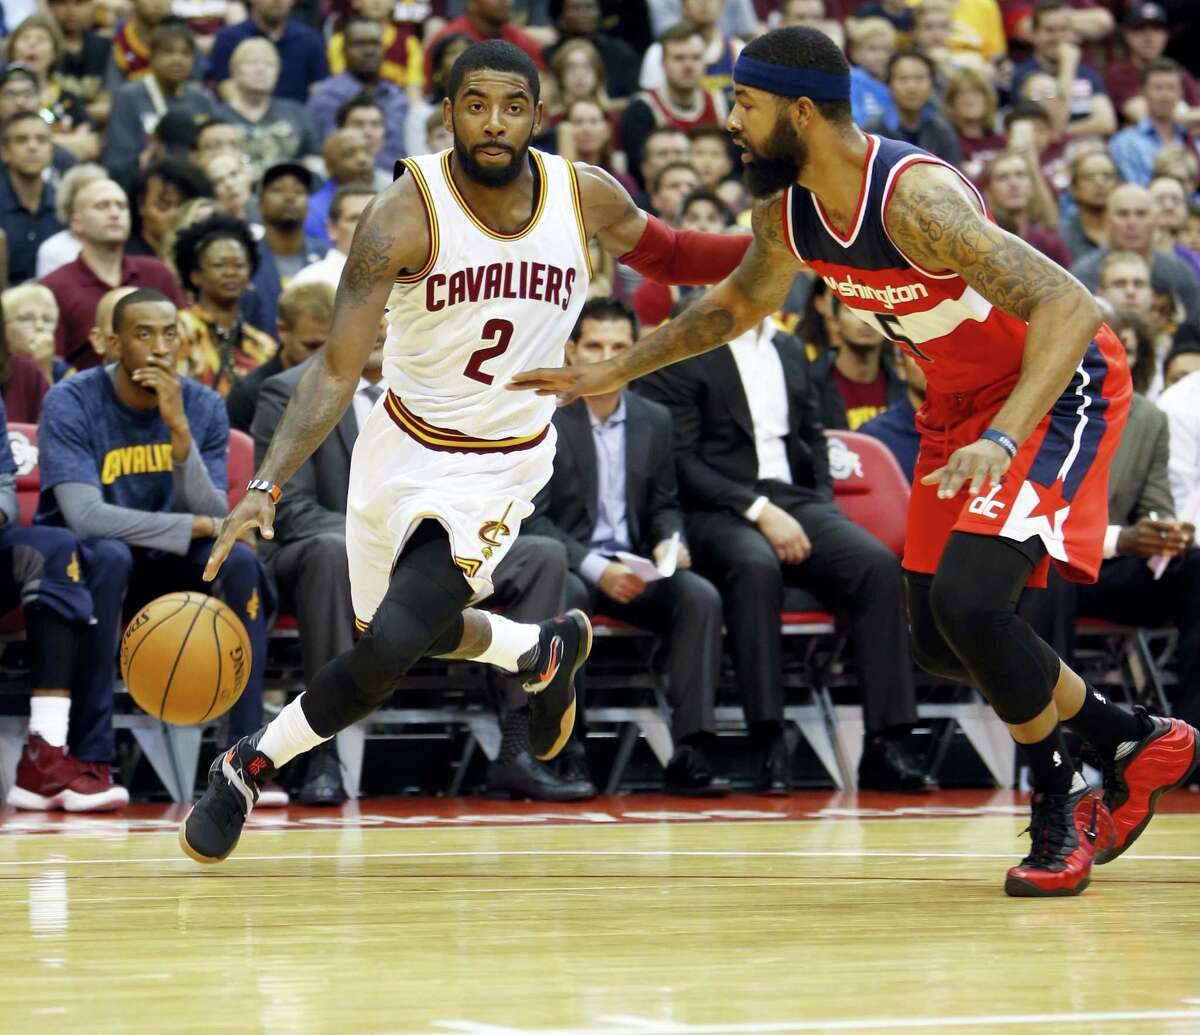 In this Oct. 18, 2016 photo, Cleveland Cavaliers’ Kyrie Irving, left, drives past Washington Wizards’ Markieff Morris during an NBA preseason basketball game in Columbus, Ohio. Cleveland’s Big 3 — LeBron James, Kevin Love and Irving — have finally meshed after two turbulent, strange seasons when the trio of All-Stars were often disconnected. But whatever kept them from uniting seems to be resolved and they’re determined to add to their legacy.